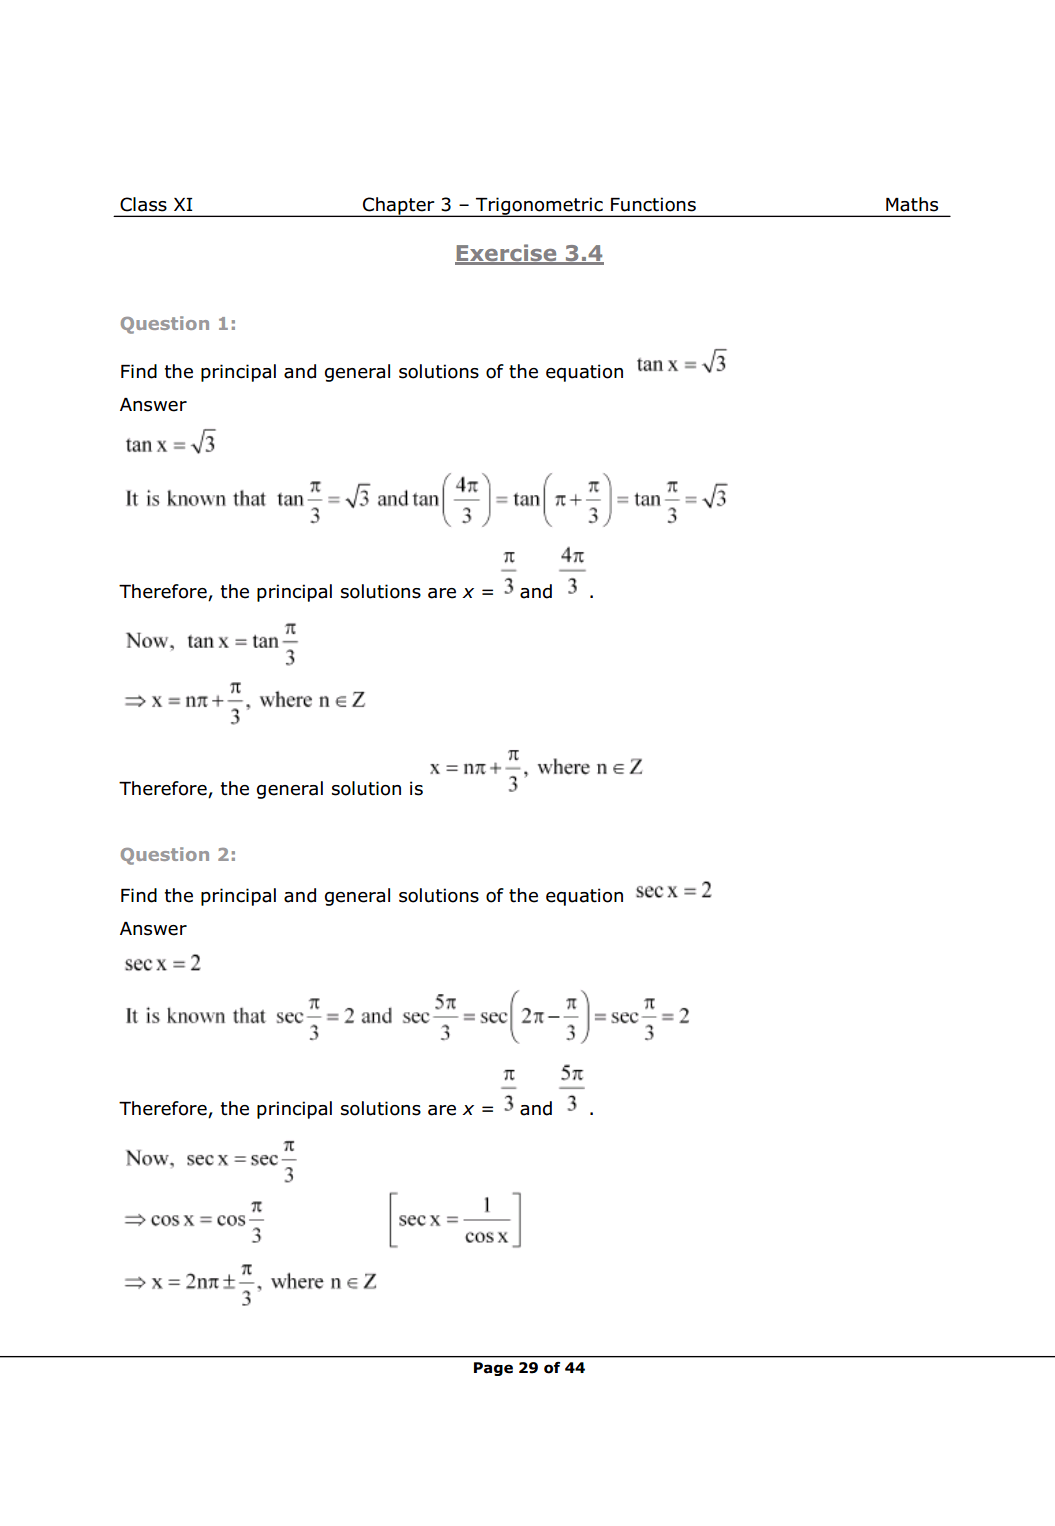 Class 11 Maths Chapter 3 Exercise 3.4 Solutions Image 1